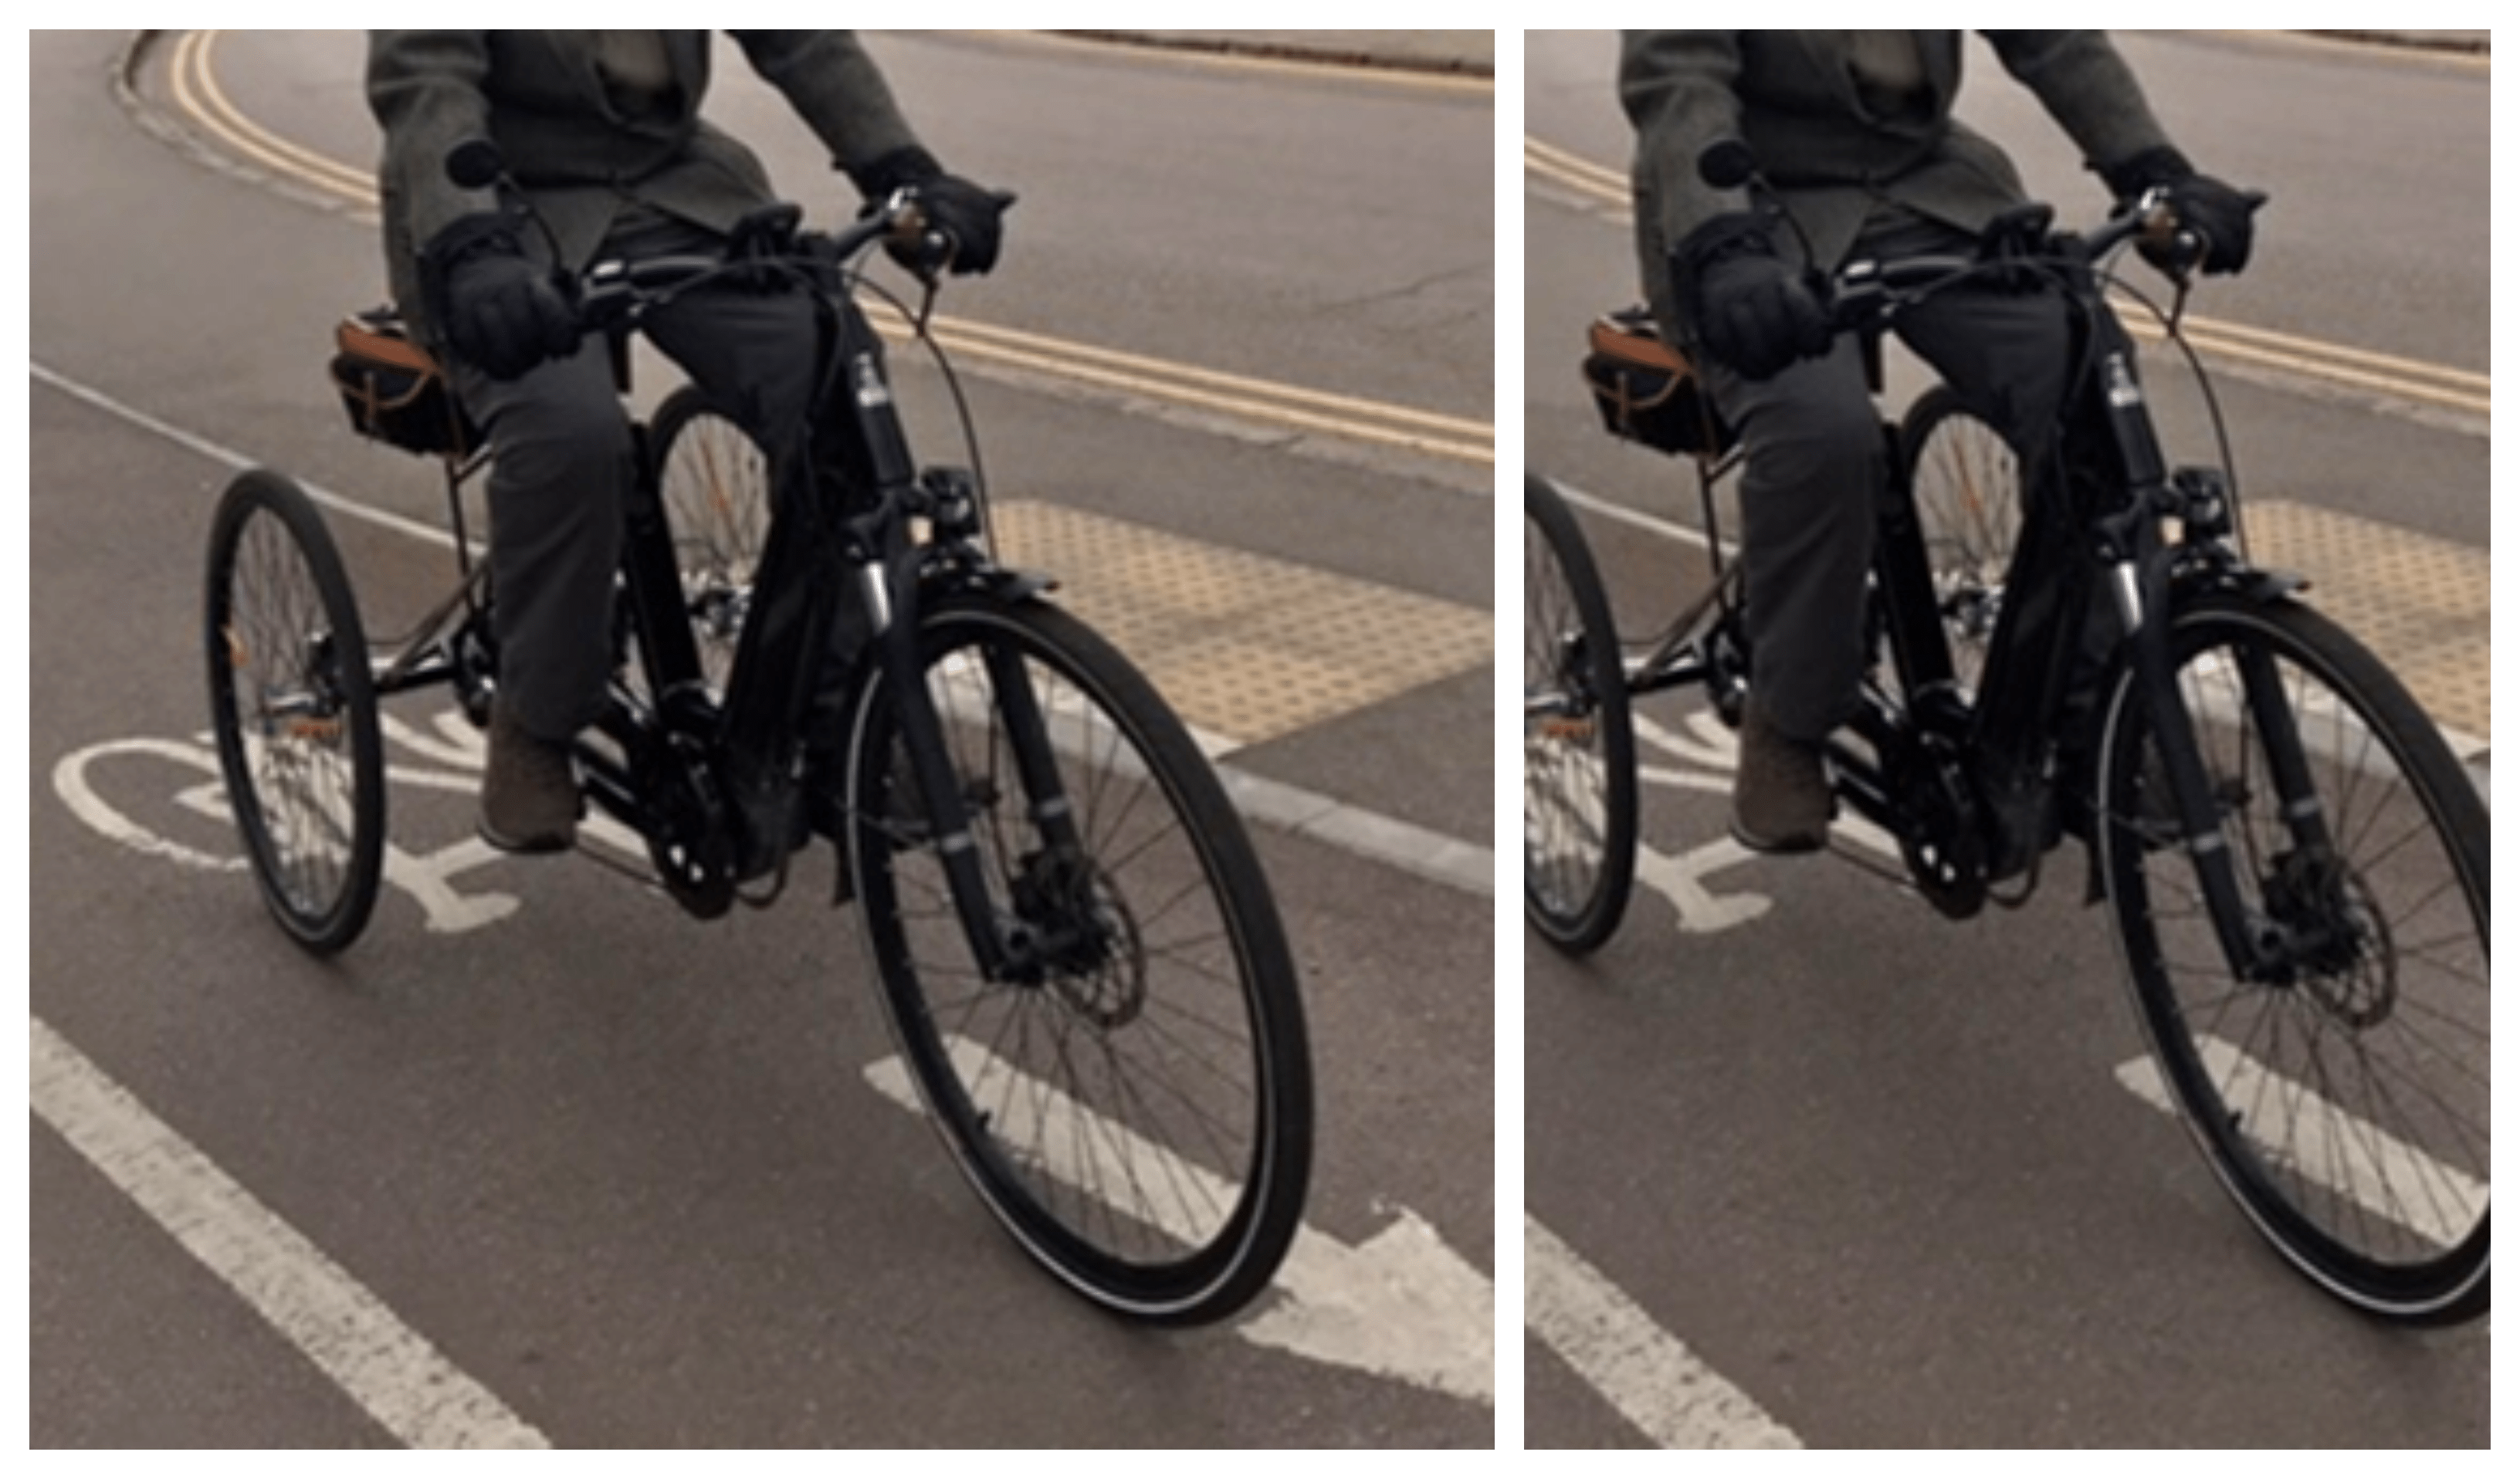 The tricycle was locked to a metal fence outside Great St Marys Church, in St Marys Passage, when it was stolen between 12:40pm and 2:15pm on Wednesday (24 January).